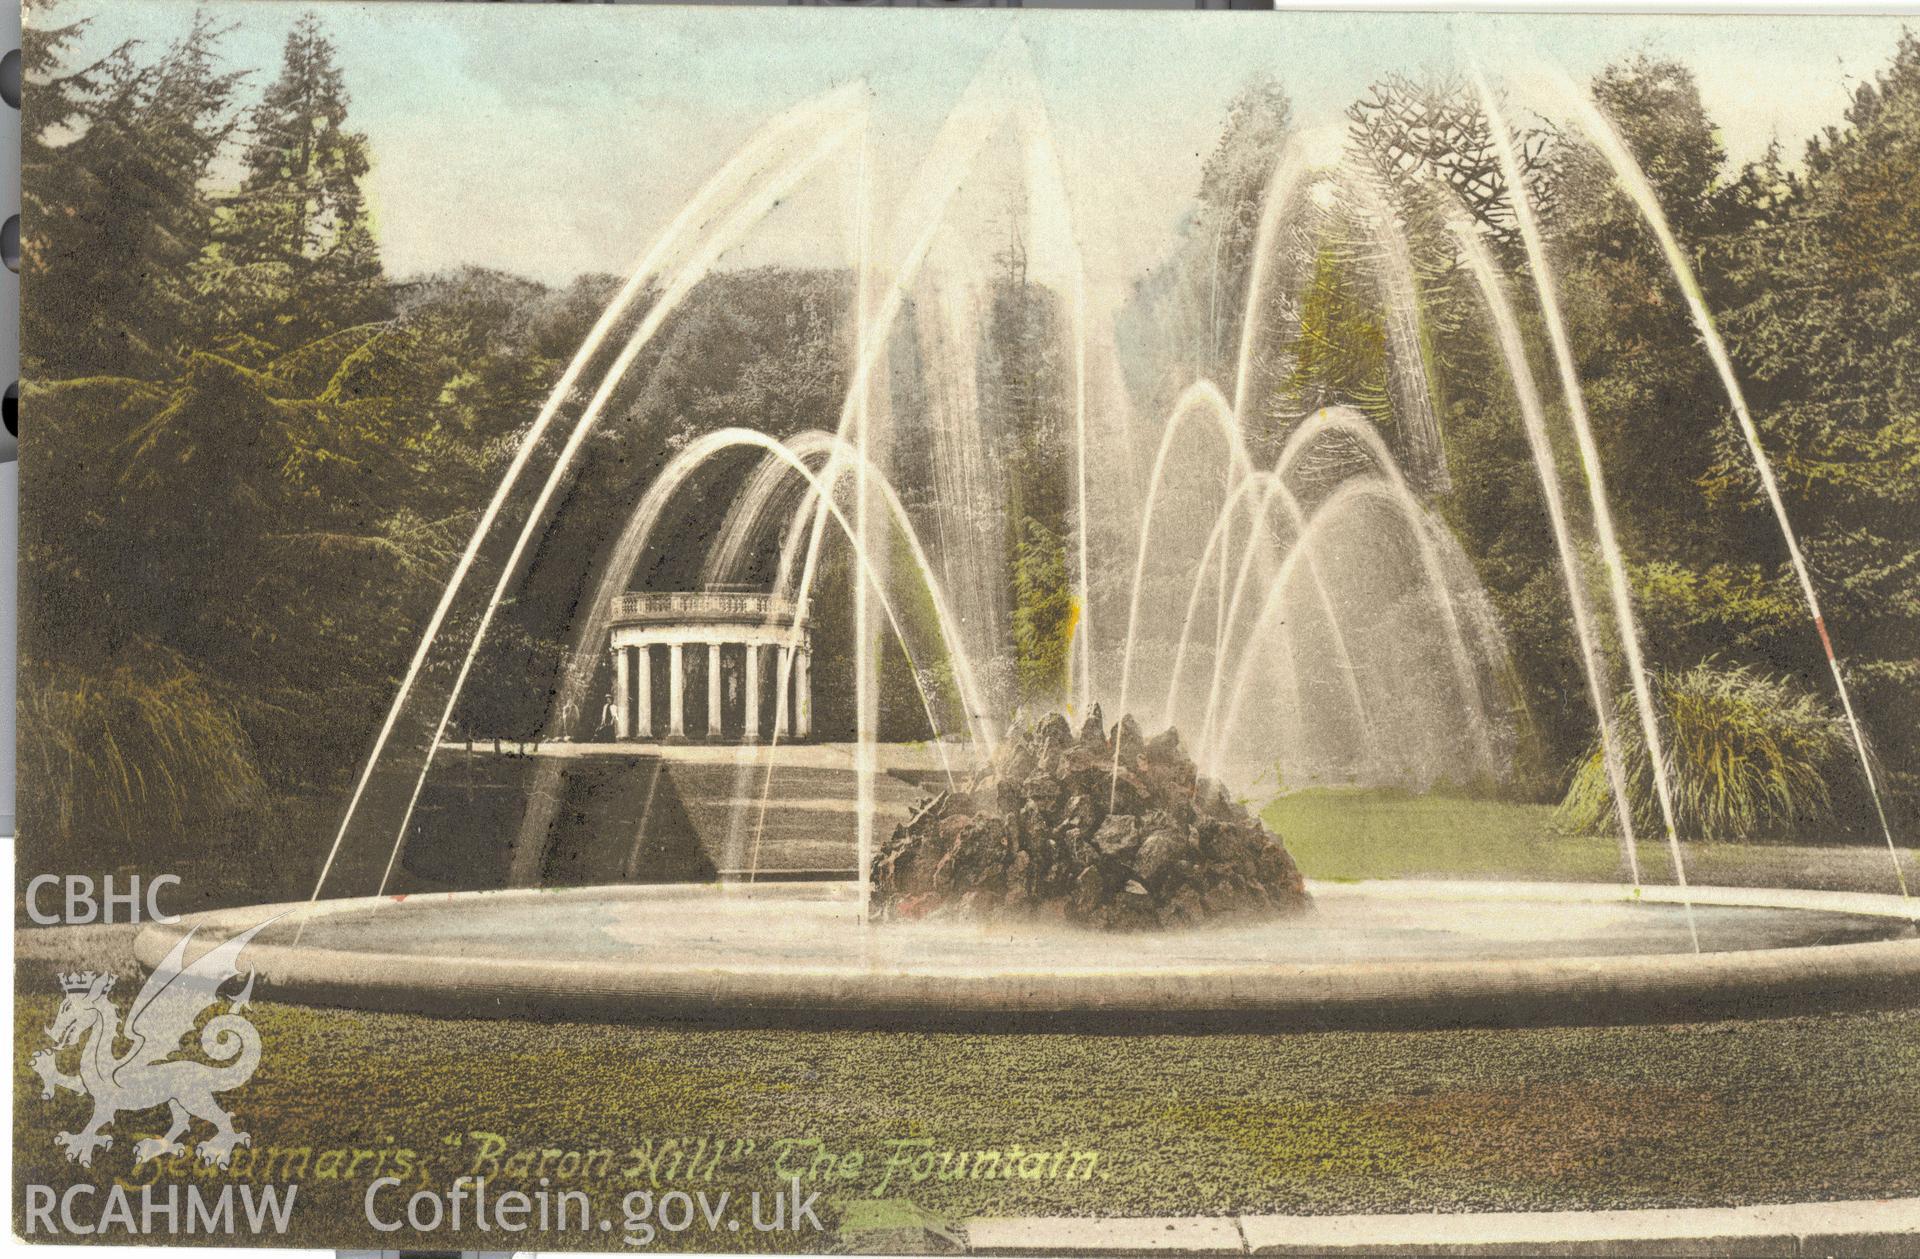 Digitised postcard image of Baron Hill Gardens, Beaumaris, F. Frith and Co Ltd. Produced by Parks and Gardens Data Services, from an original item in the Peter Davis Collection at Parks and Gardens UK. We hold only web-resolution images of this collection, suitable for viewing on screen and for research purposes only. We do not hold the original images, or publication quality scans.